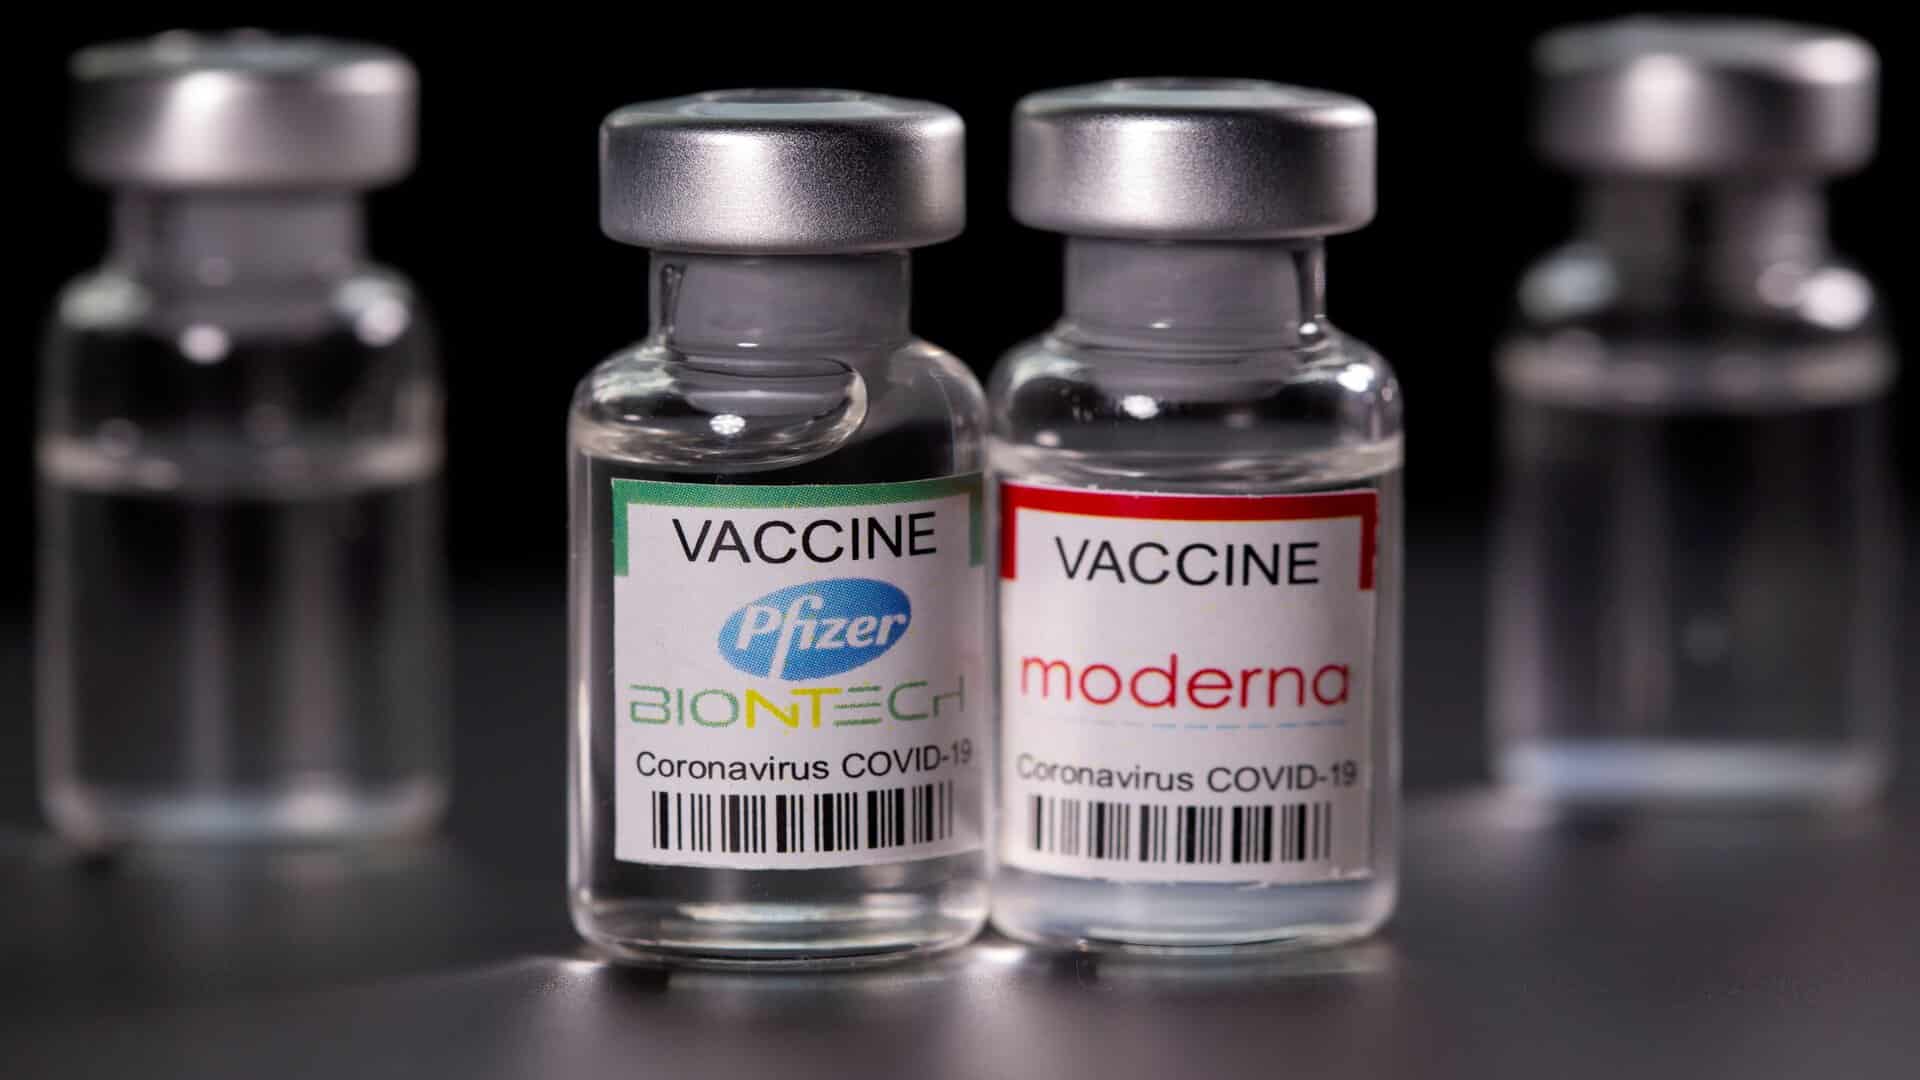 COVID-19 vaccine makers closely monitor new strain Omicron, can adapt vaccine if needed